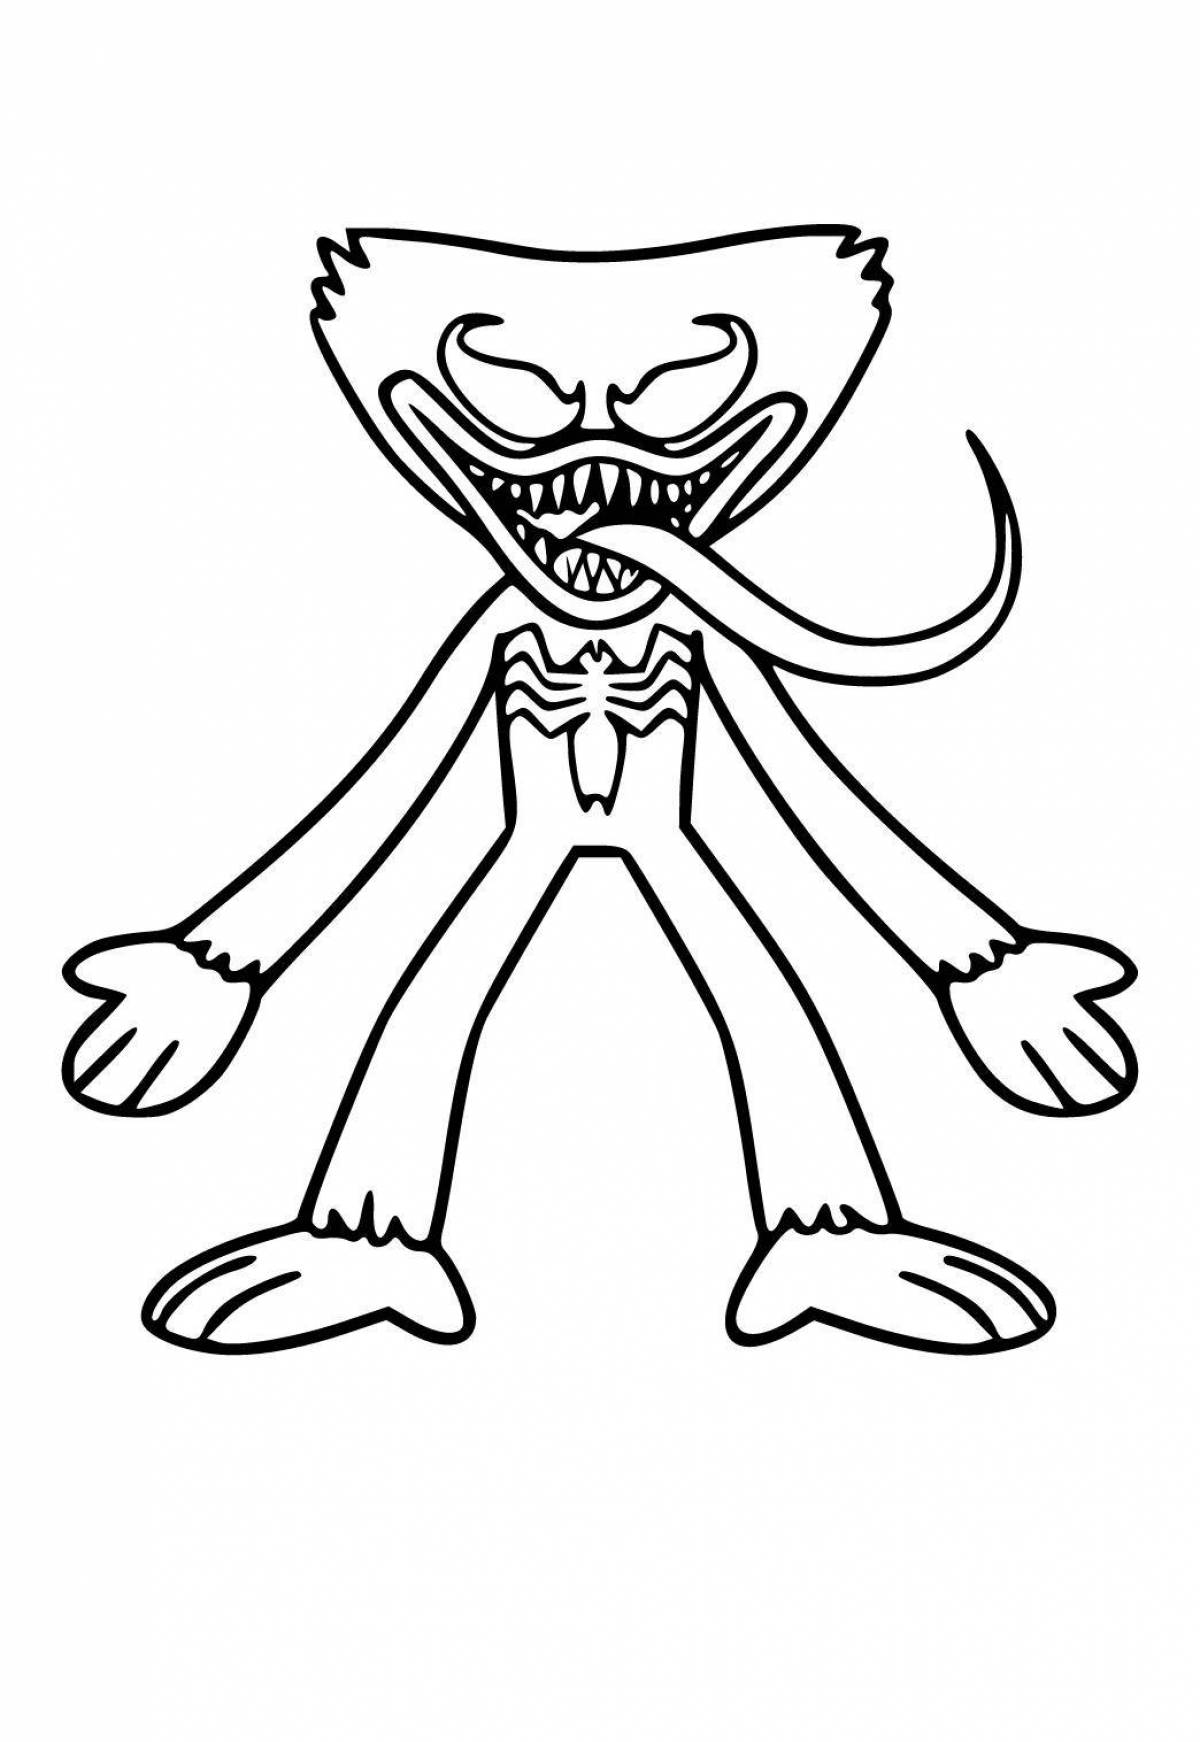 Joyous hacky bugs coloring page